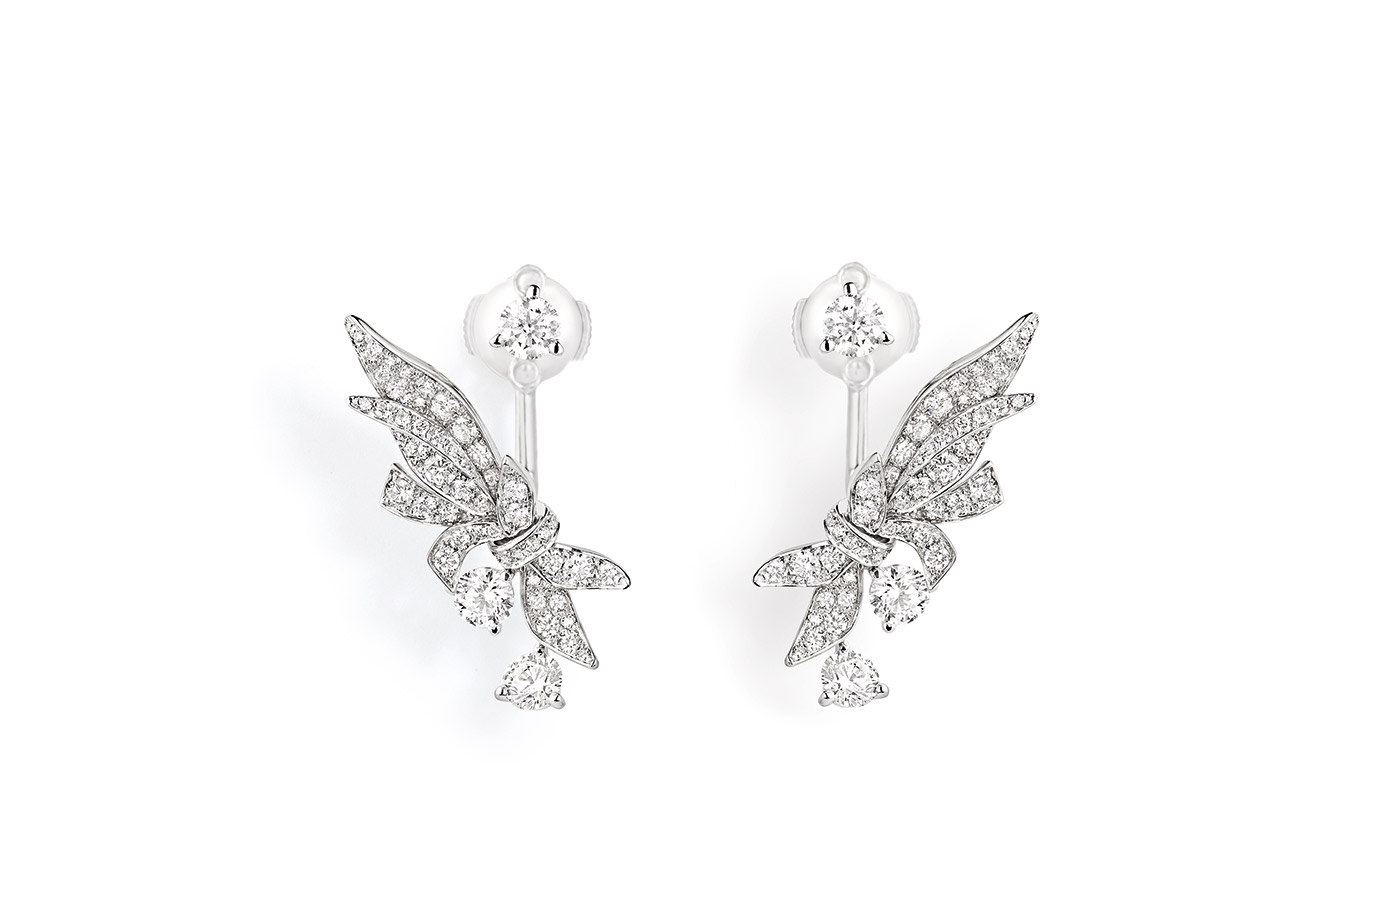 Chaumet introduce their latest collection - Laurier - embellished with ...